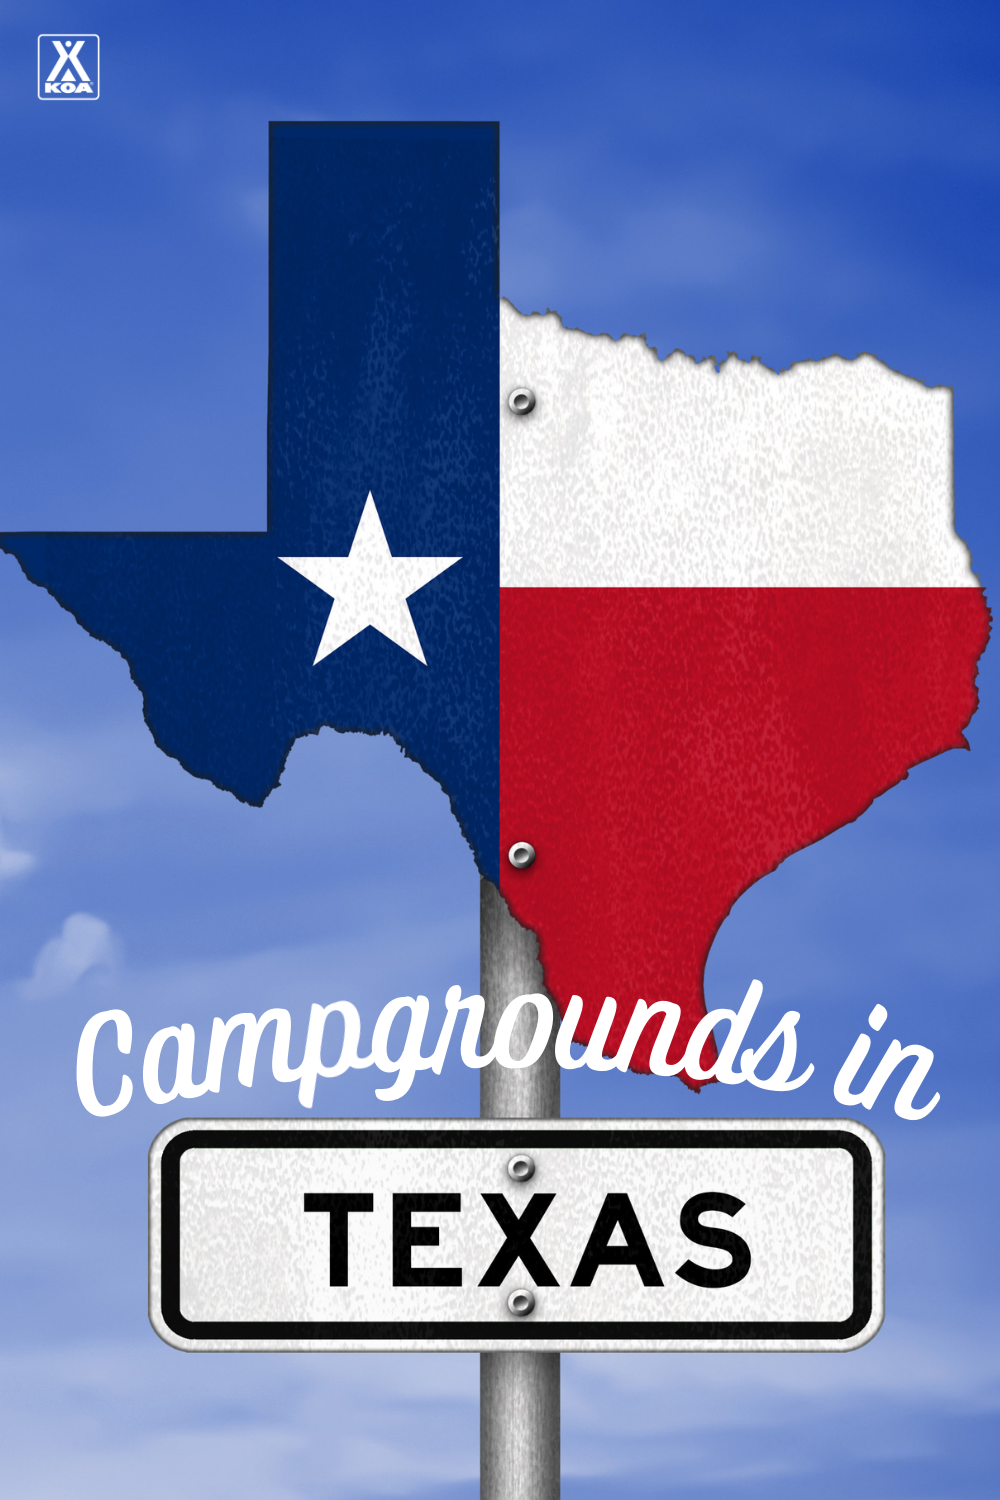 Looking to plan a camping trip to Texas? Our Texas camping guide has all the information you need on when to go, where to stay, camping tips & more!